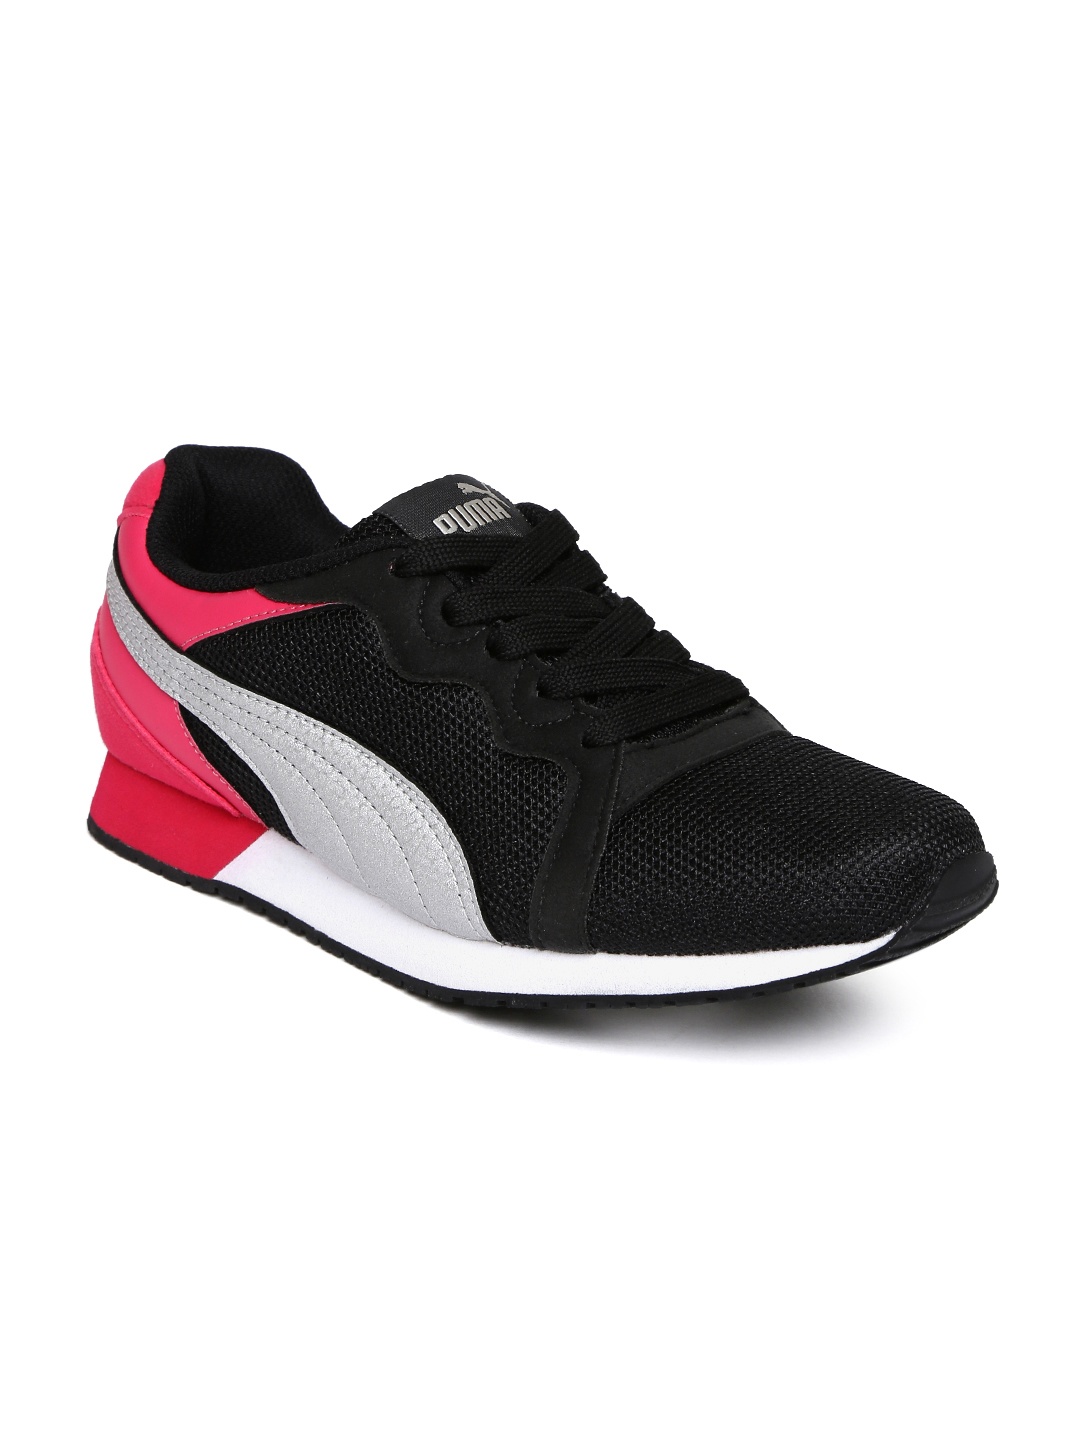 Puma Women Black & Pink Pacer Sneakers price Myntra. Loafers Deals at ...